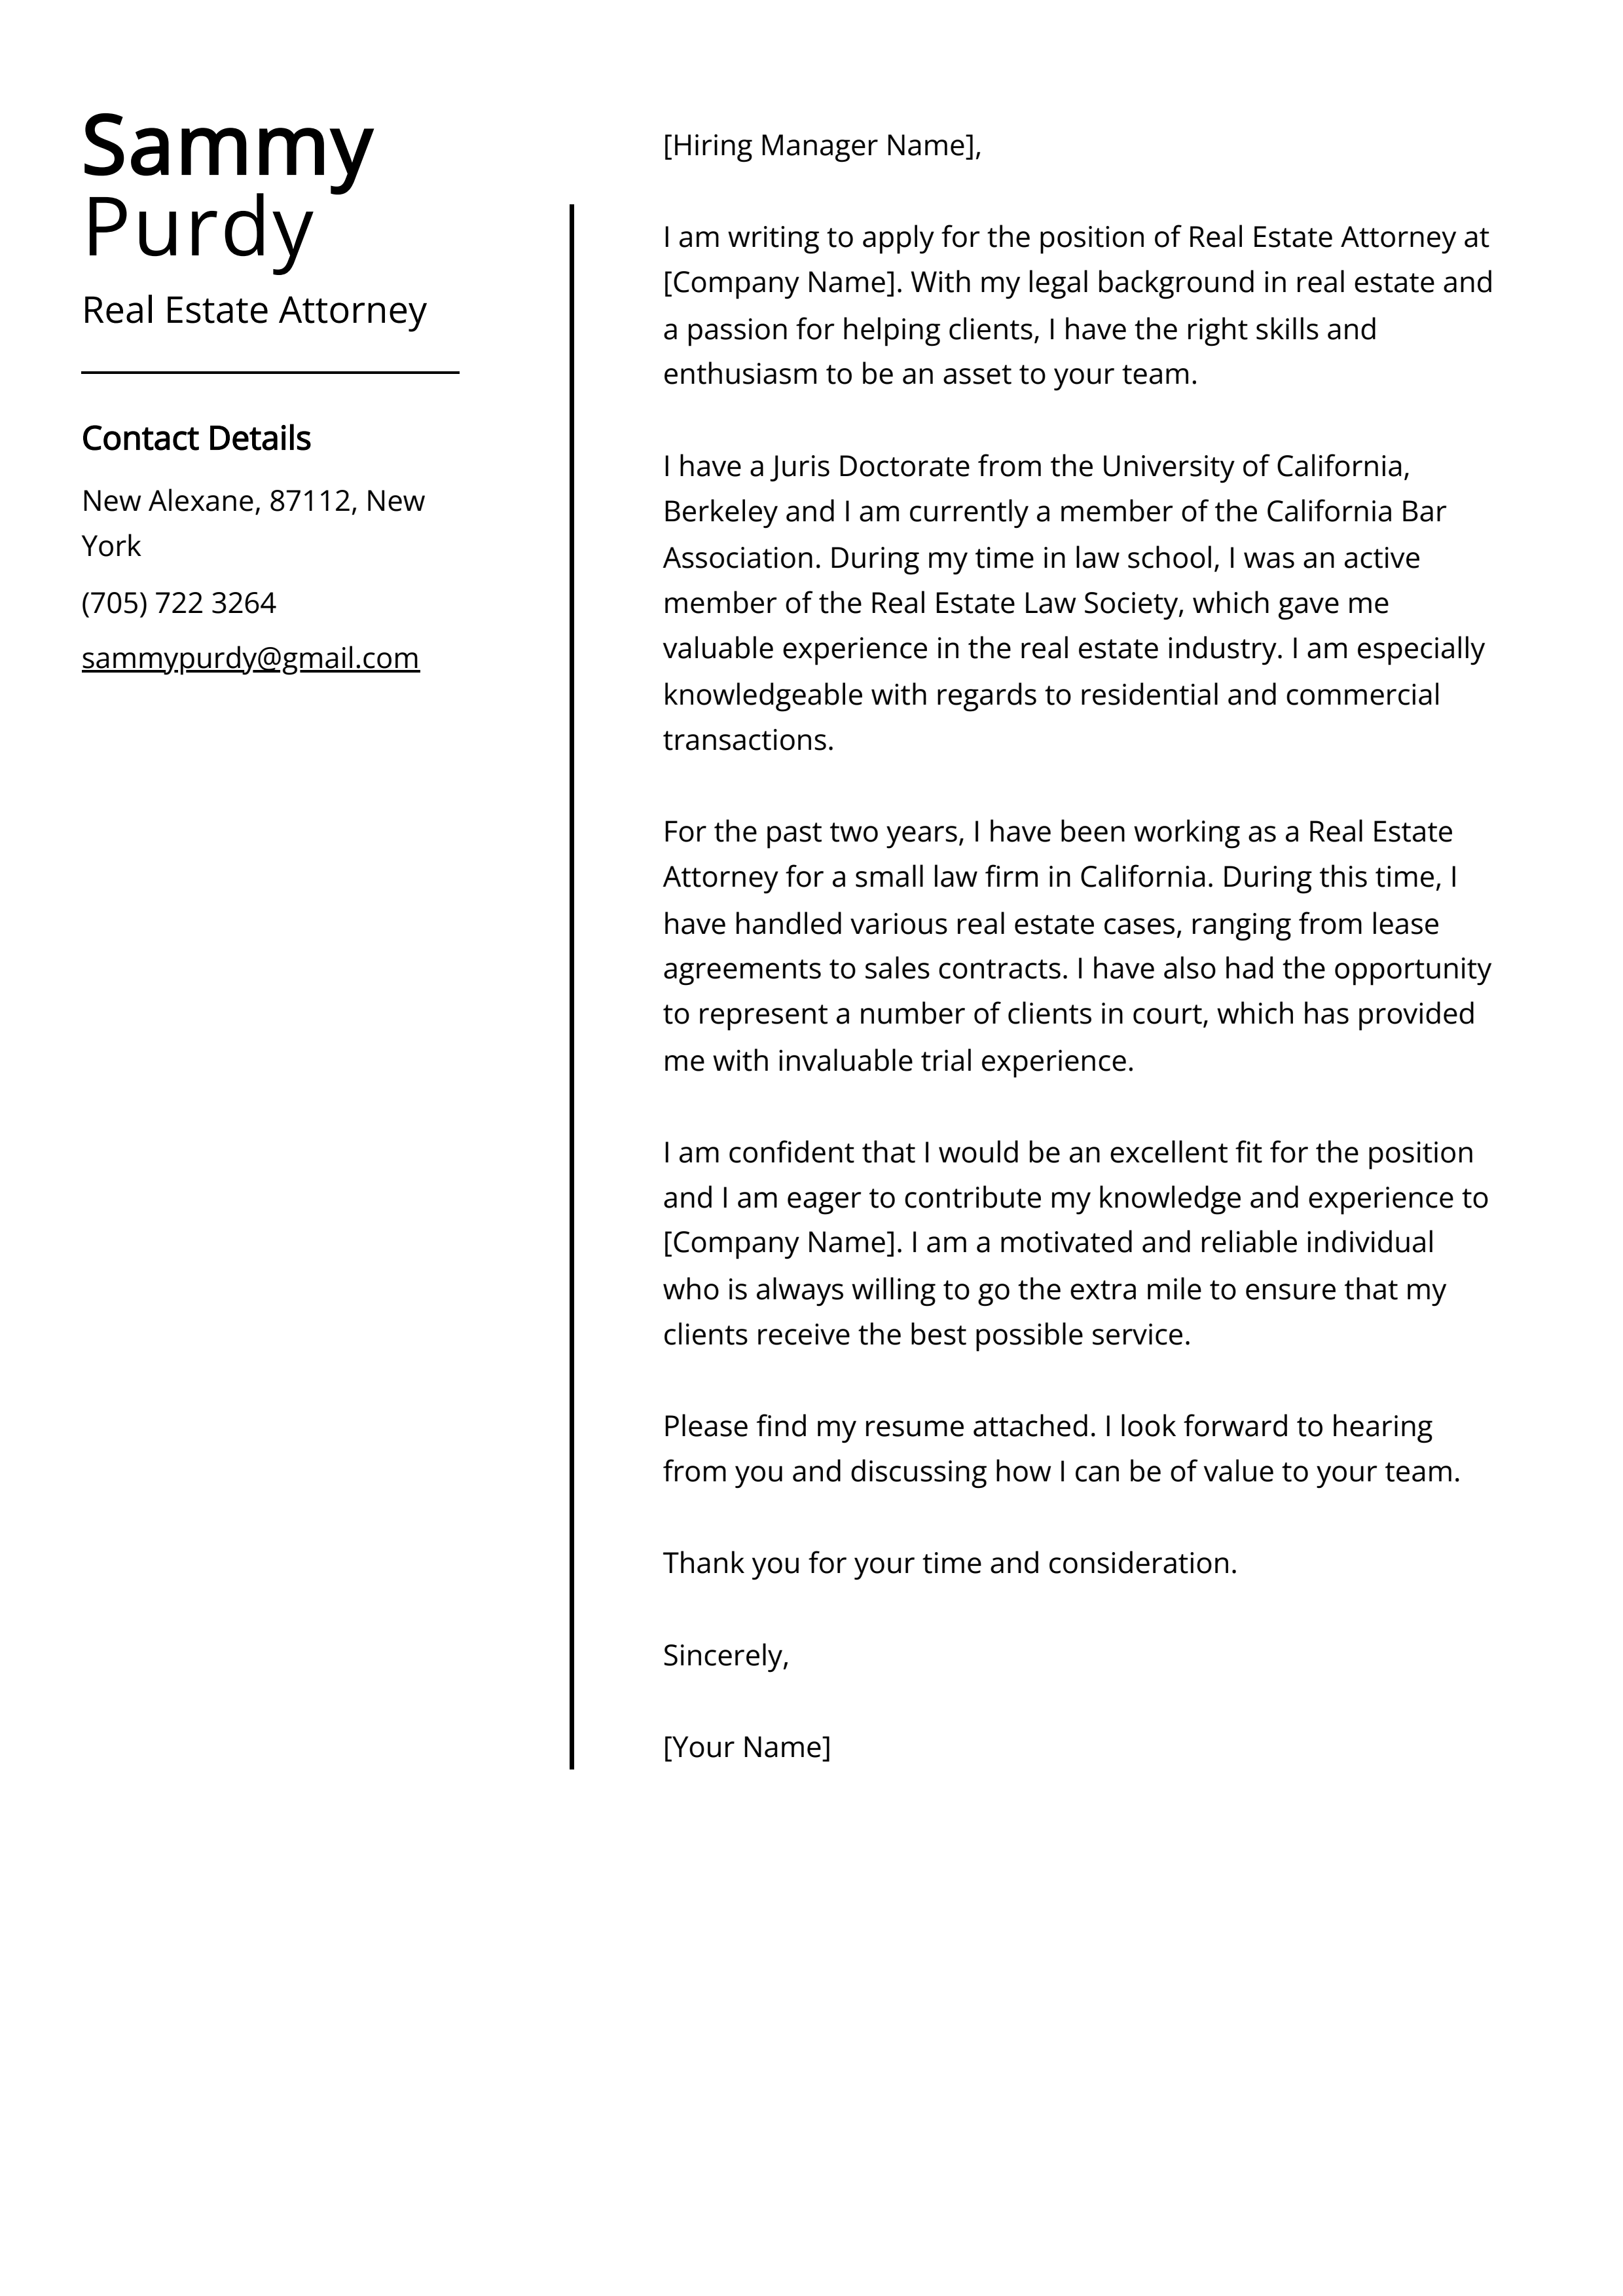 Real Estate Attorney Cover Letter Example